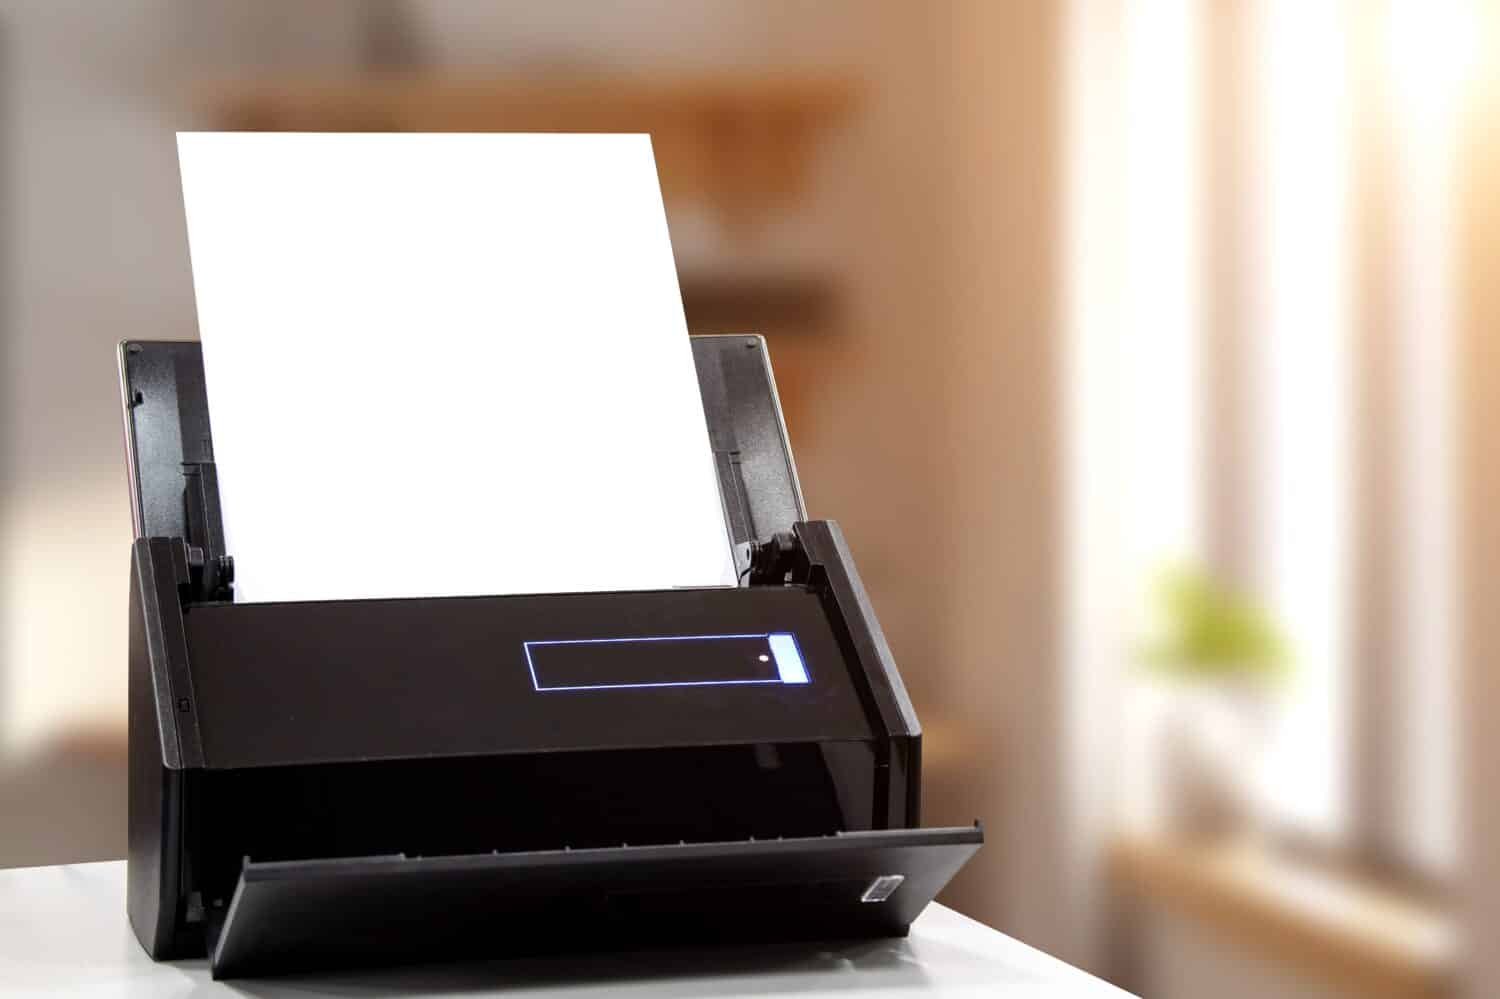 Fujitsu ScanSnap iX1600 Review: A Robust Desktop Scanner for Documents